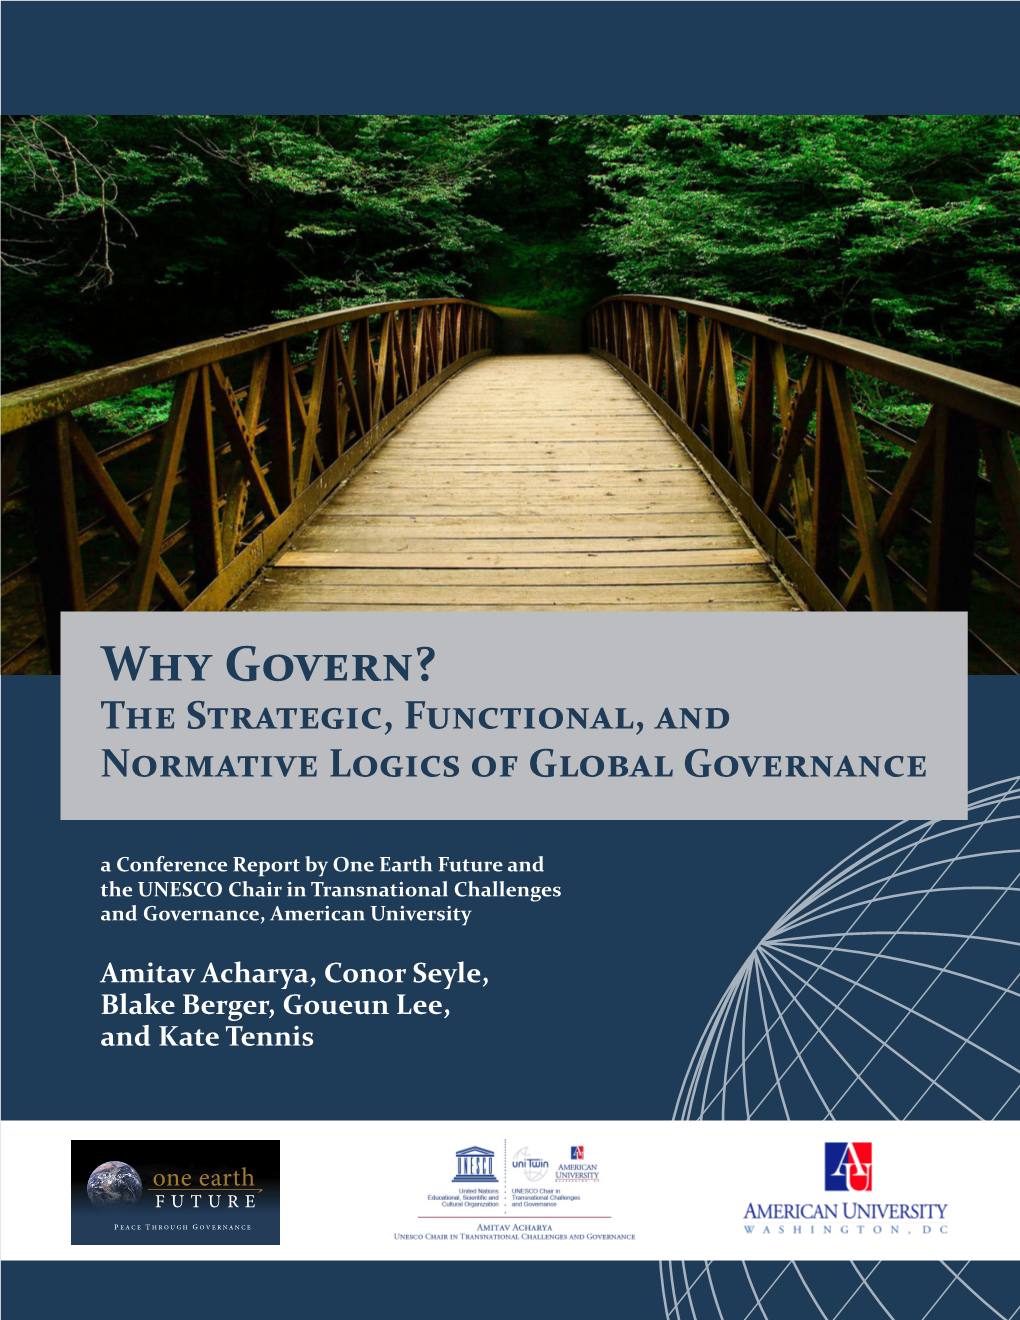 Why Govern? the Strategic, Functional, and Normative Logics of Global Governance